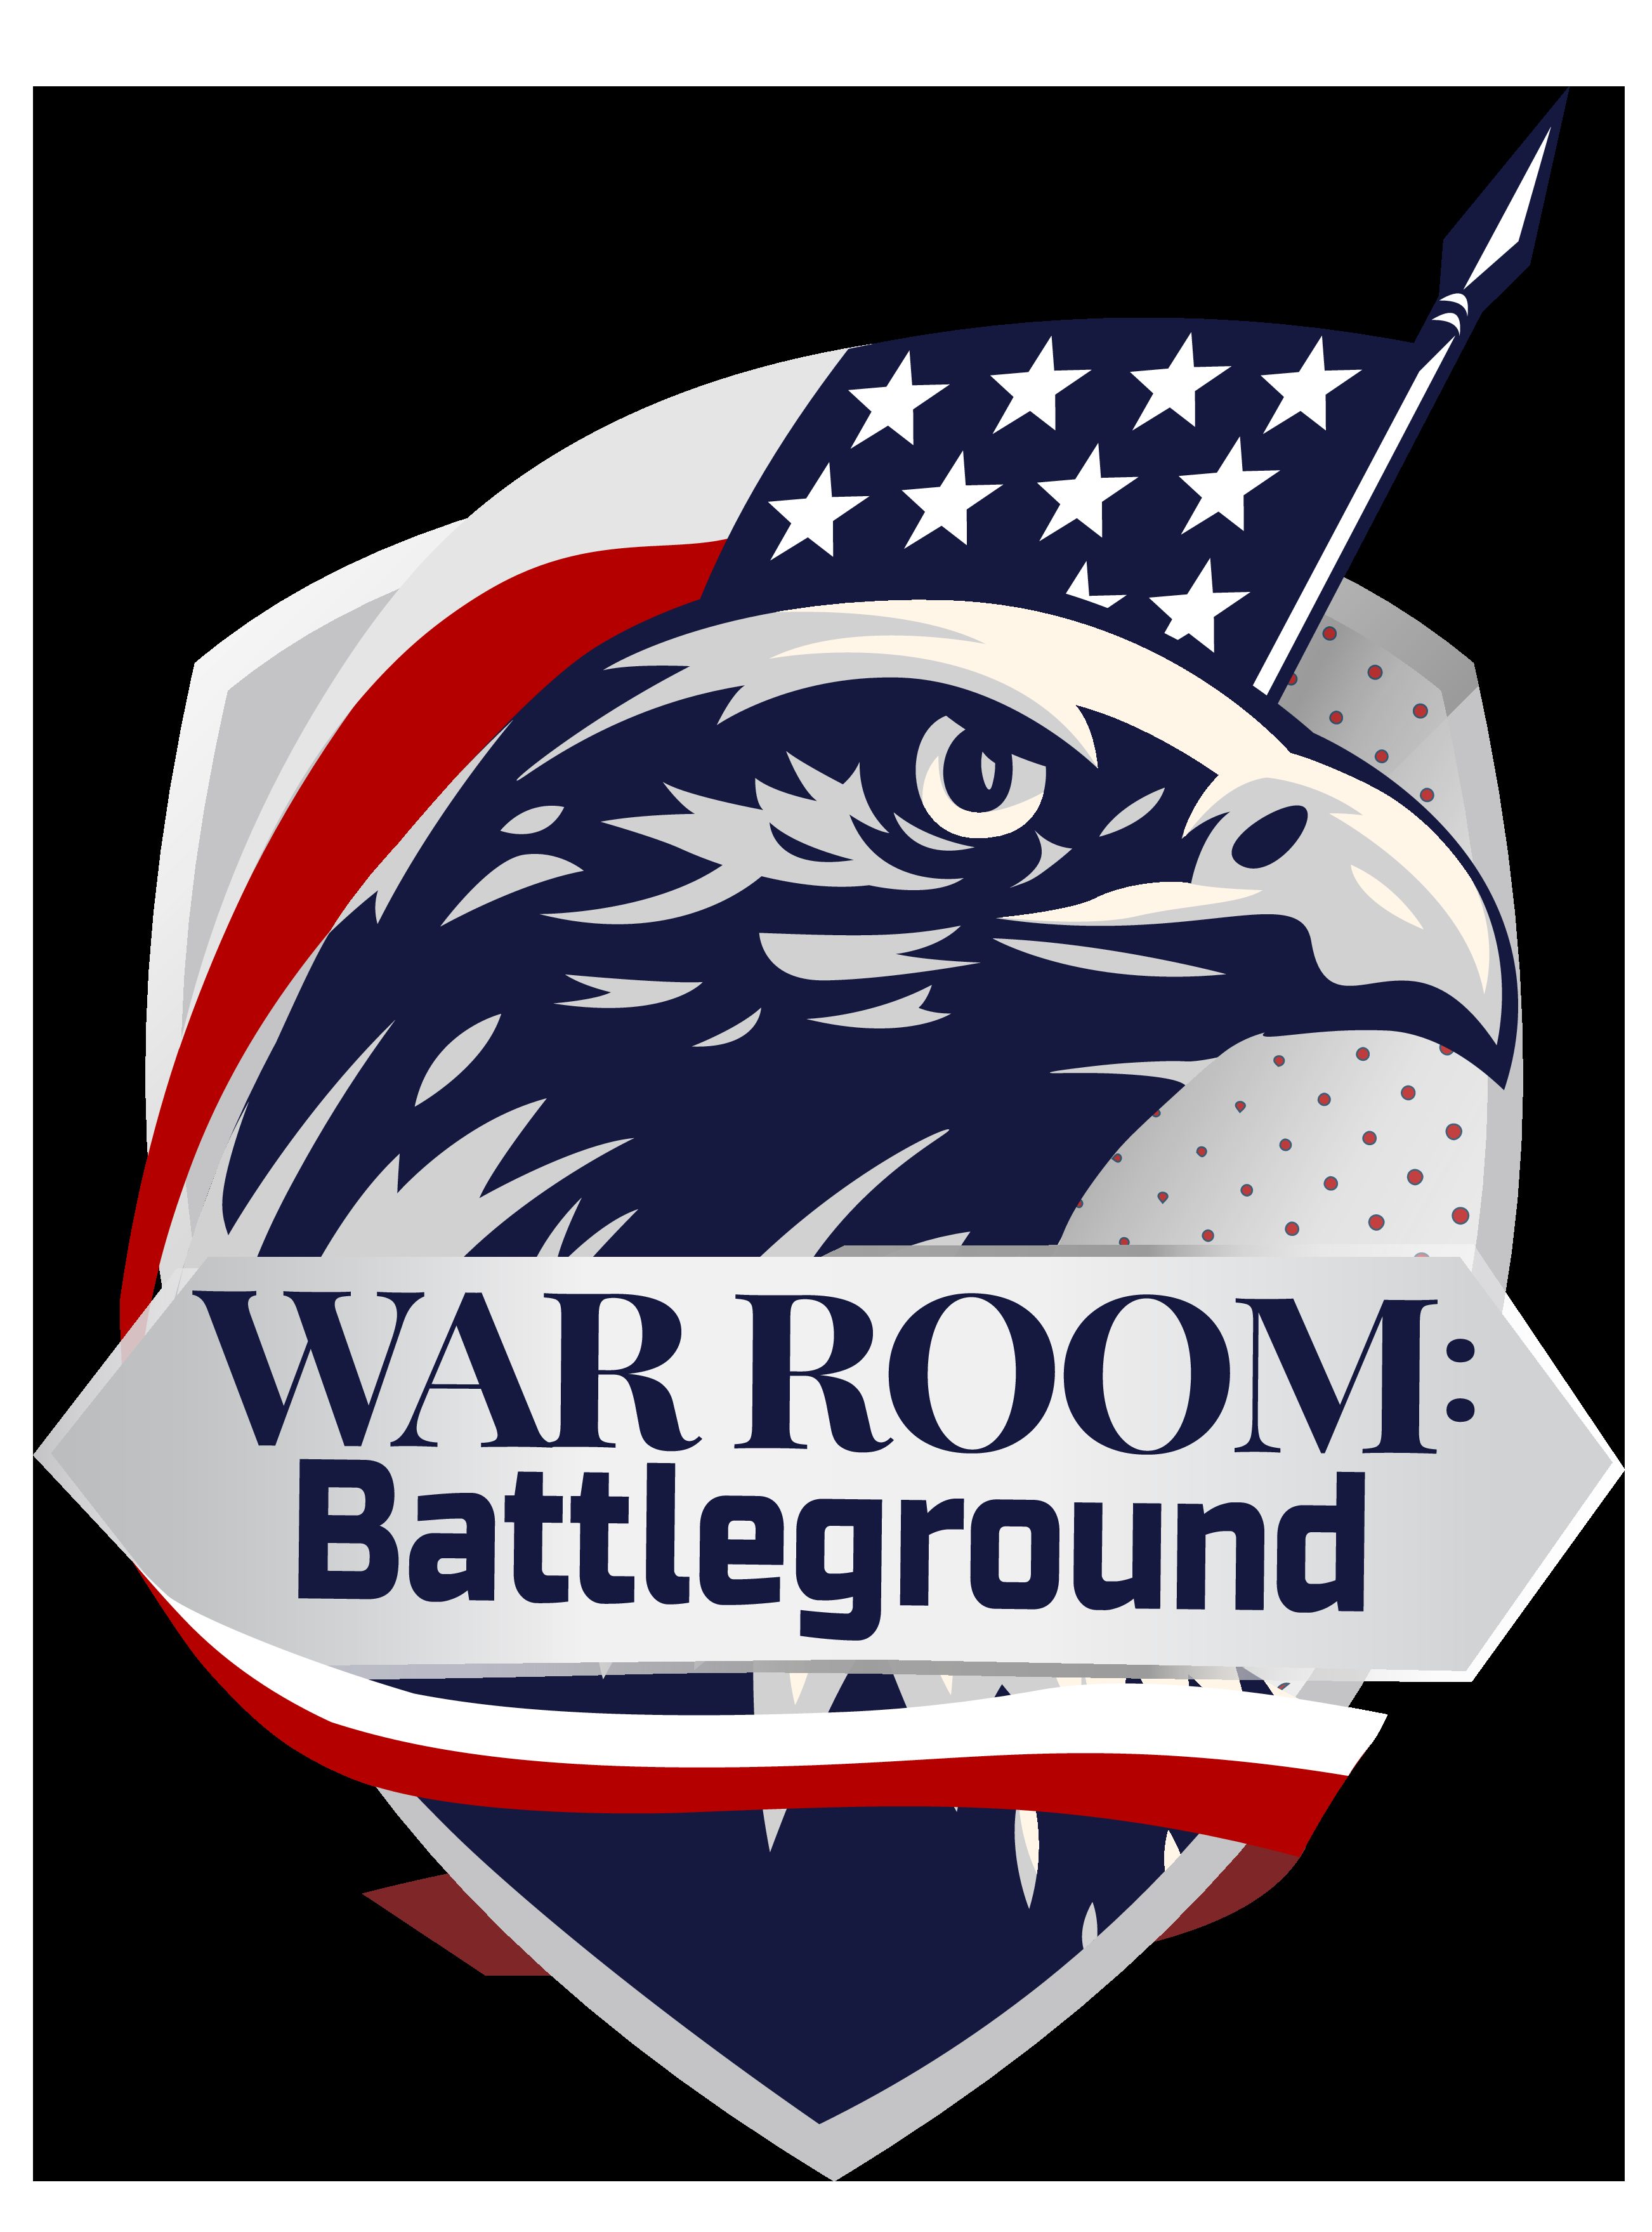 Battleground EP 221: Where Is The Money really Coming From; The Next Steps In The War